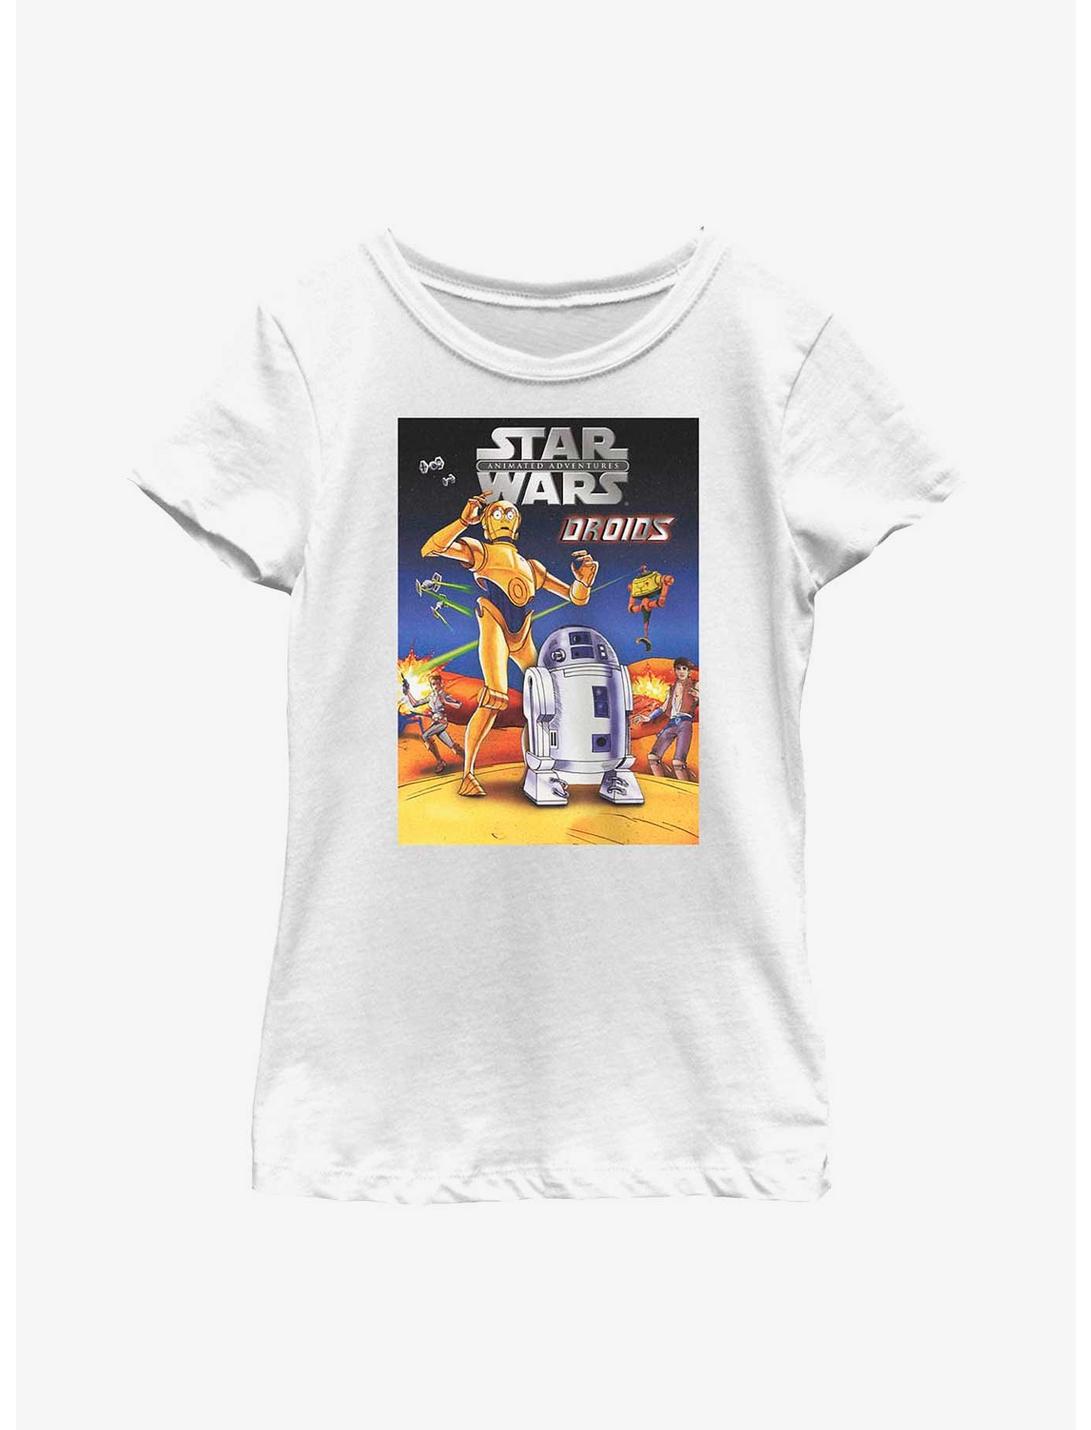 Star Wars Animated Droids Youth Girls T-Shirt, WHITE, hi-res